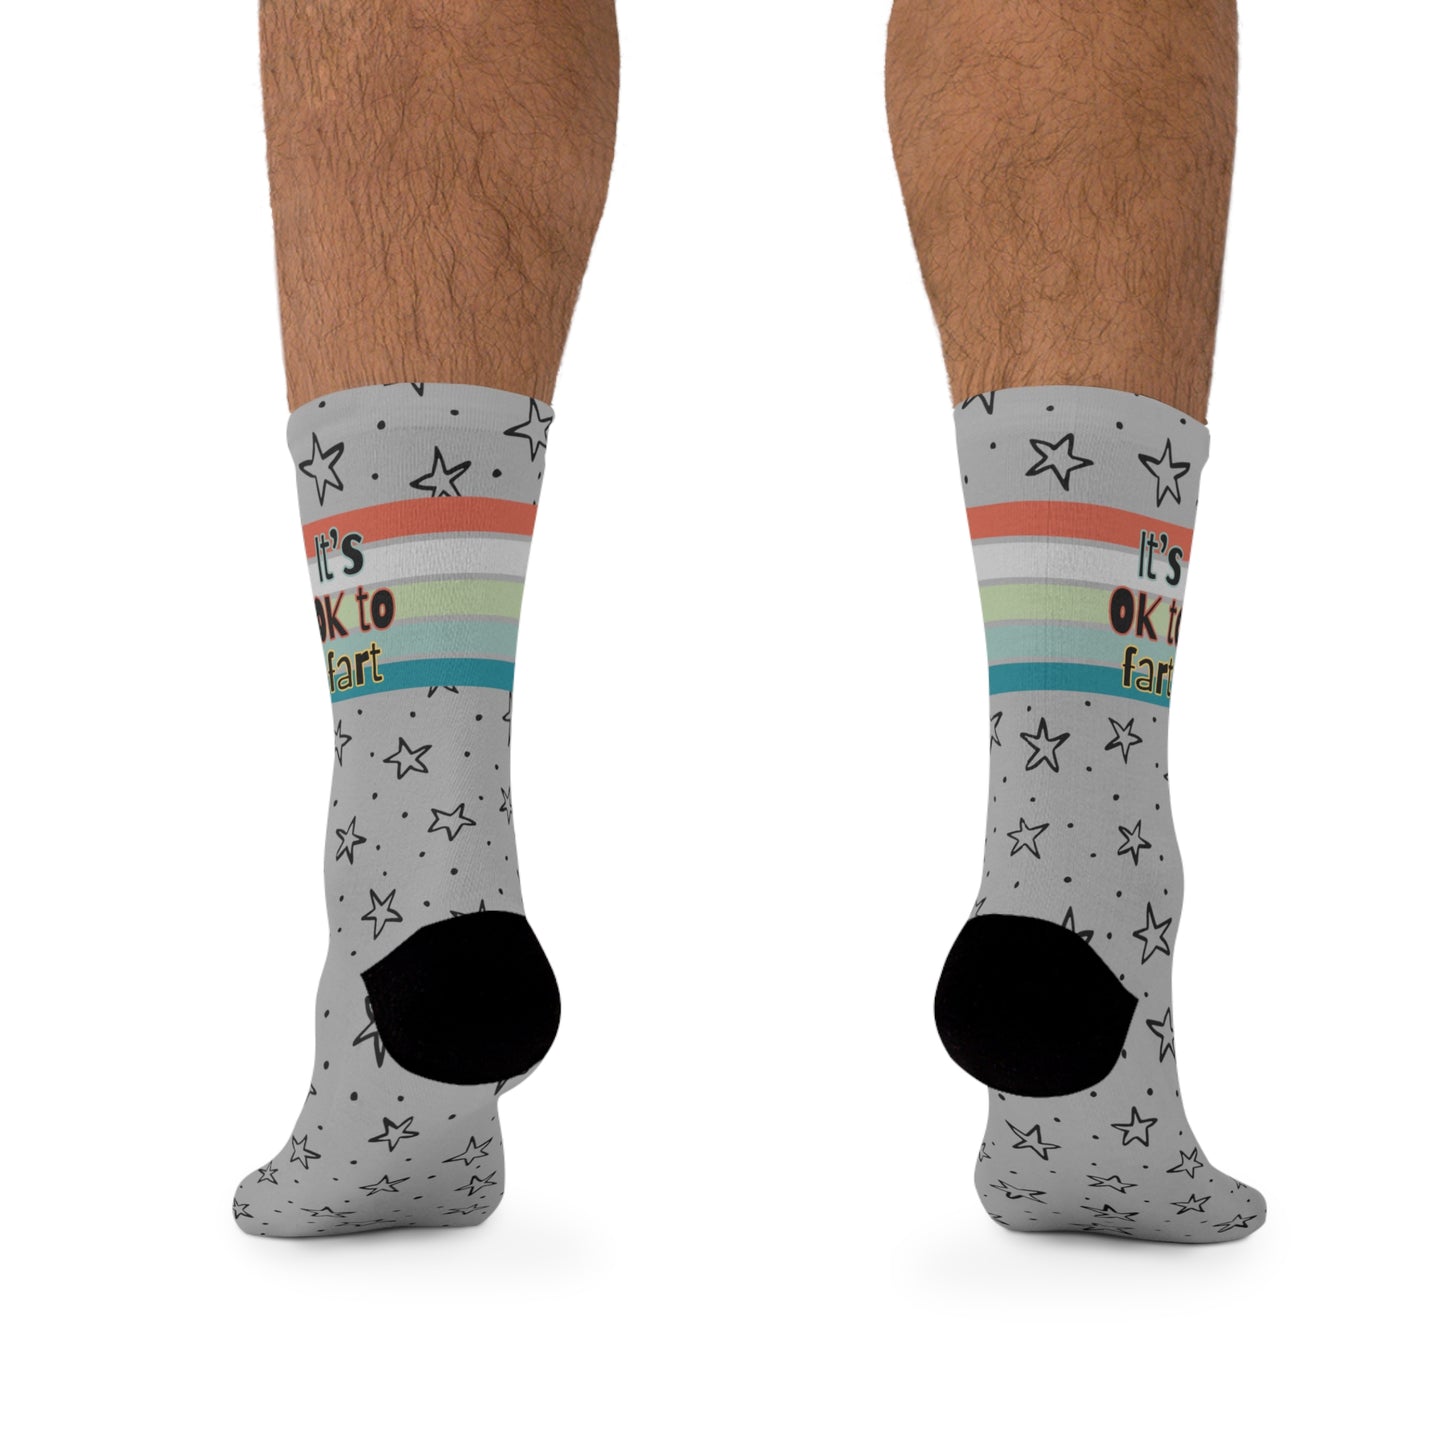 It's Ok to Fart | Recycled Poly Socks